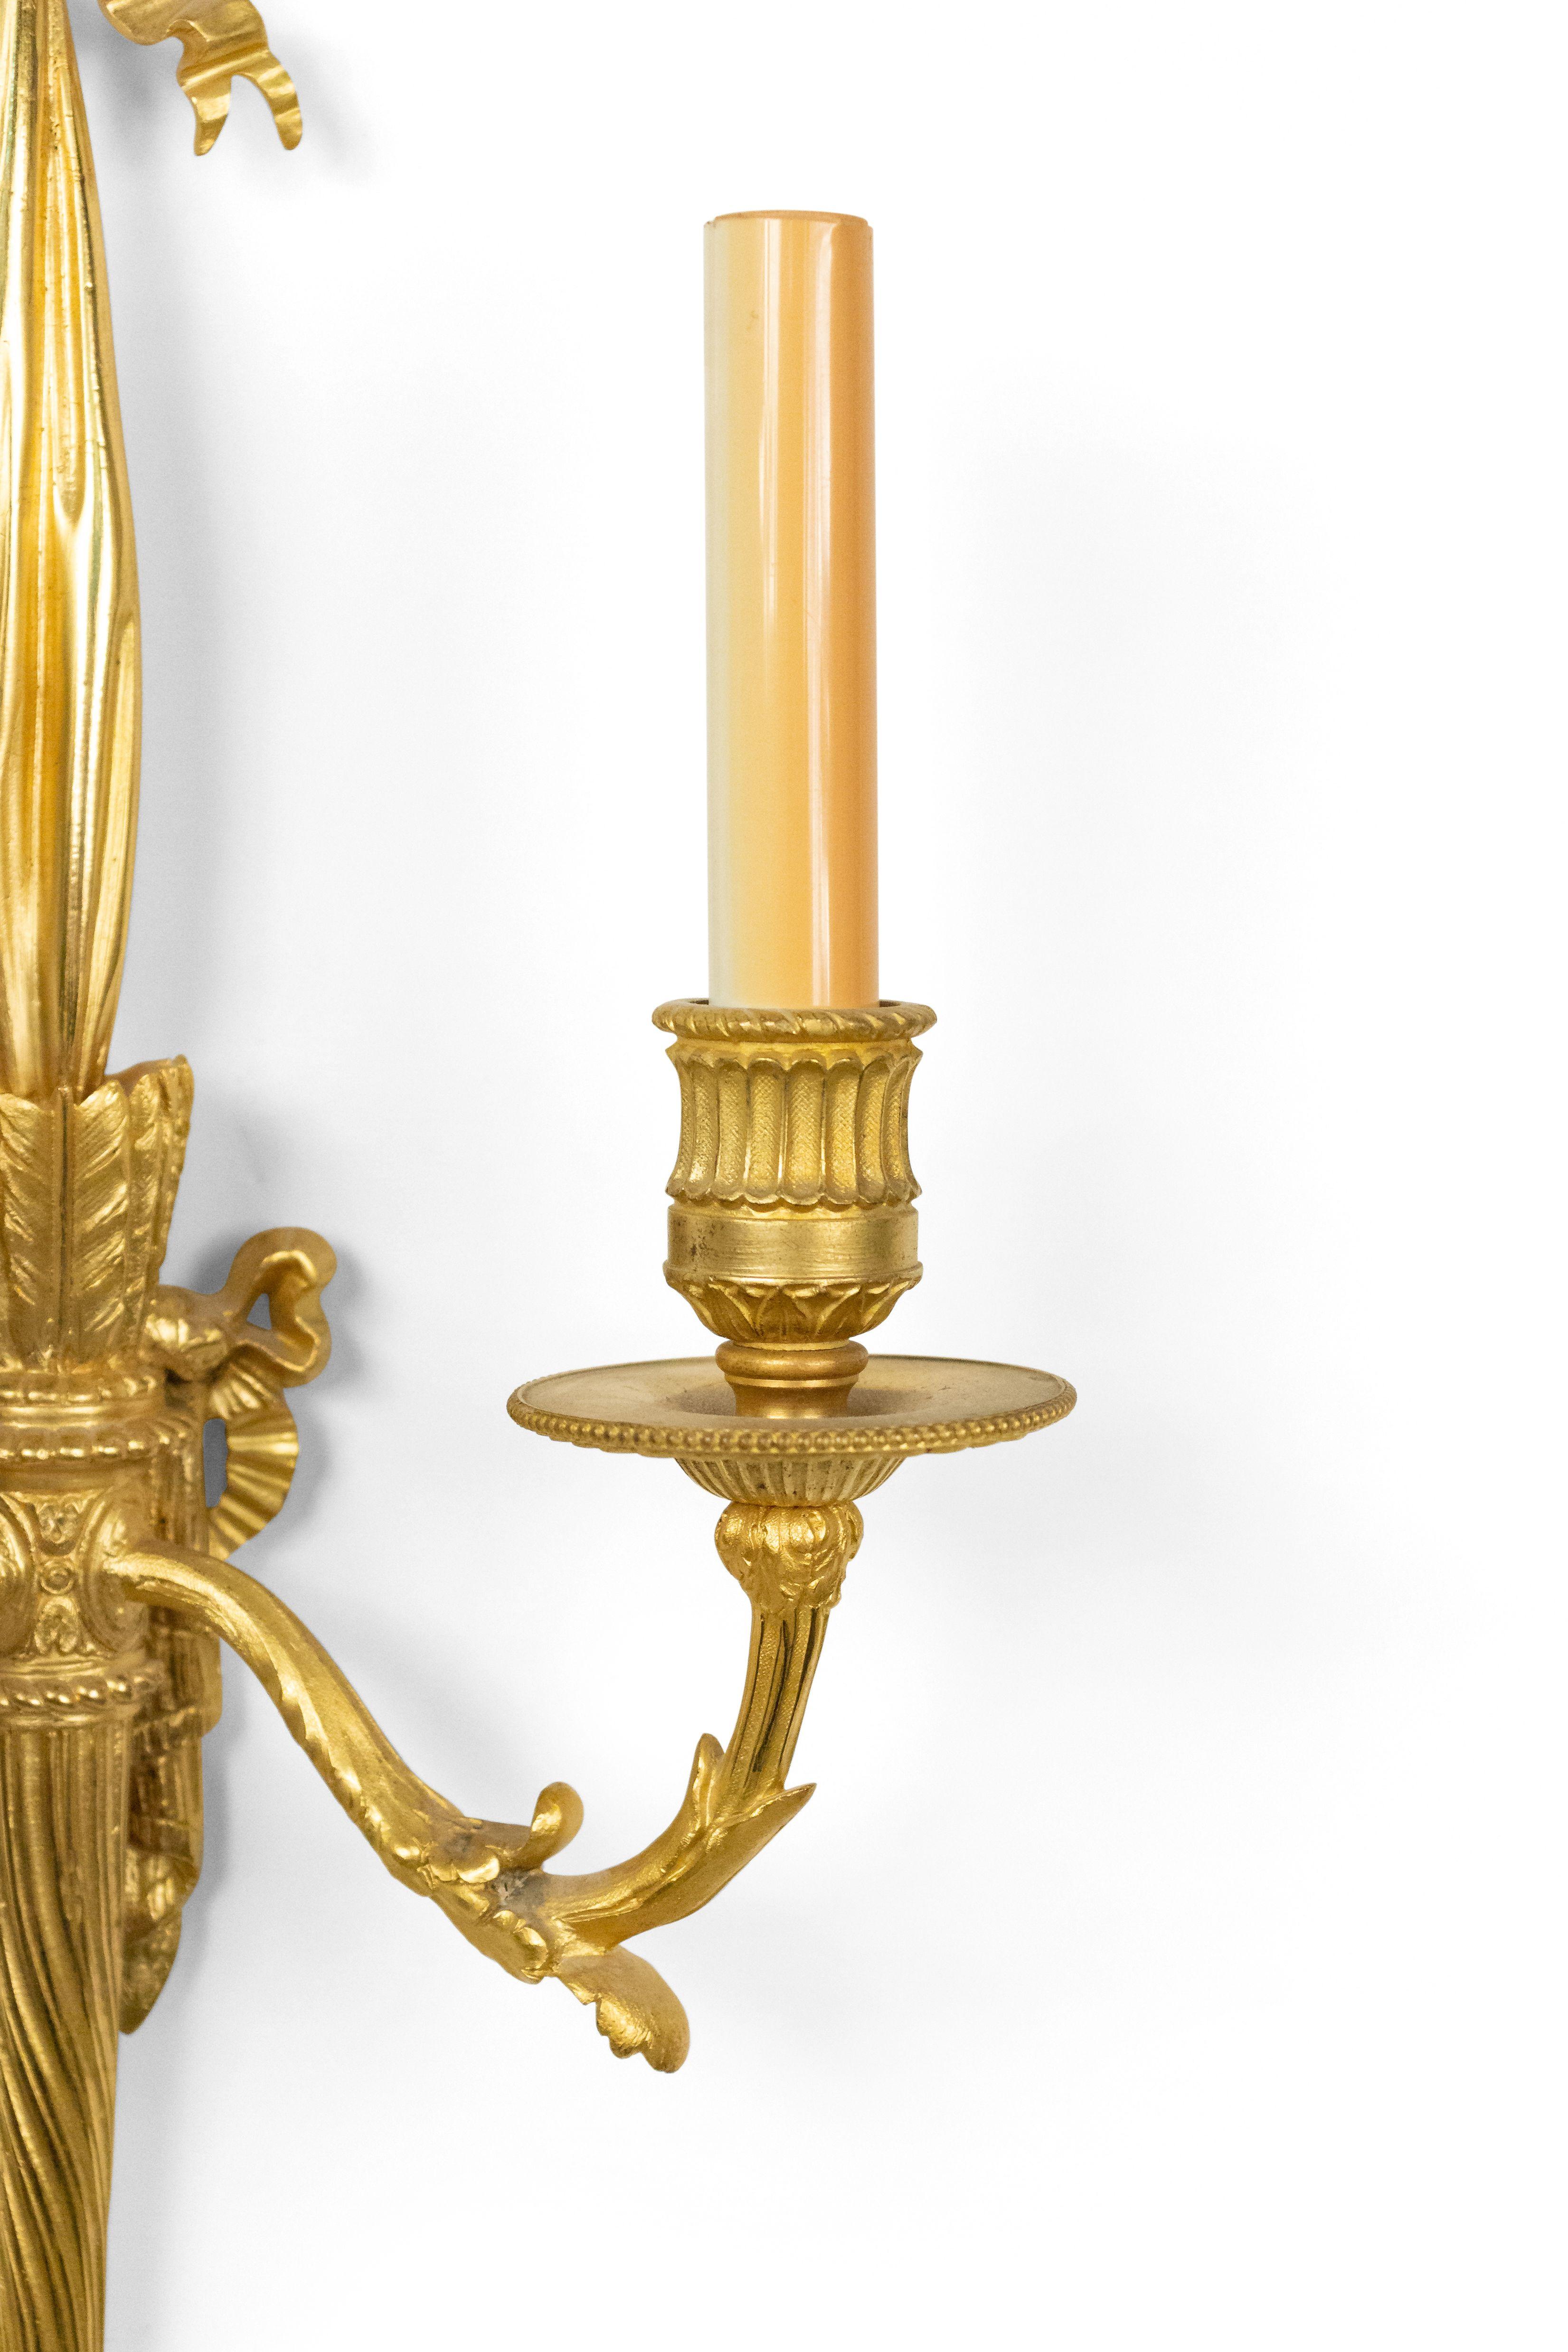 Pair of French Louis XVI style (19th century) bronze doré 2 scroll arm wall sconces with torch and drape design and bow knot top and fluted bobeche.